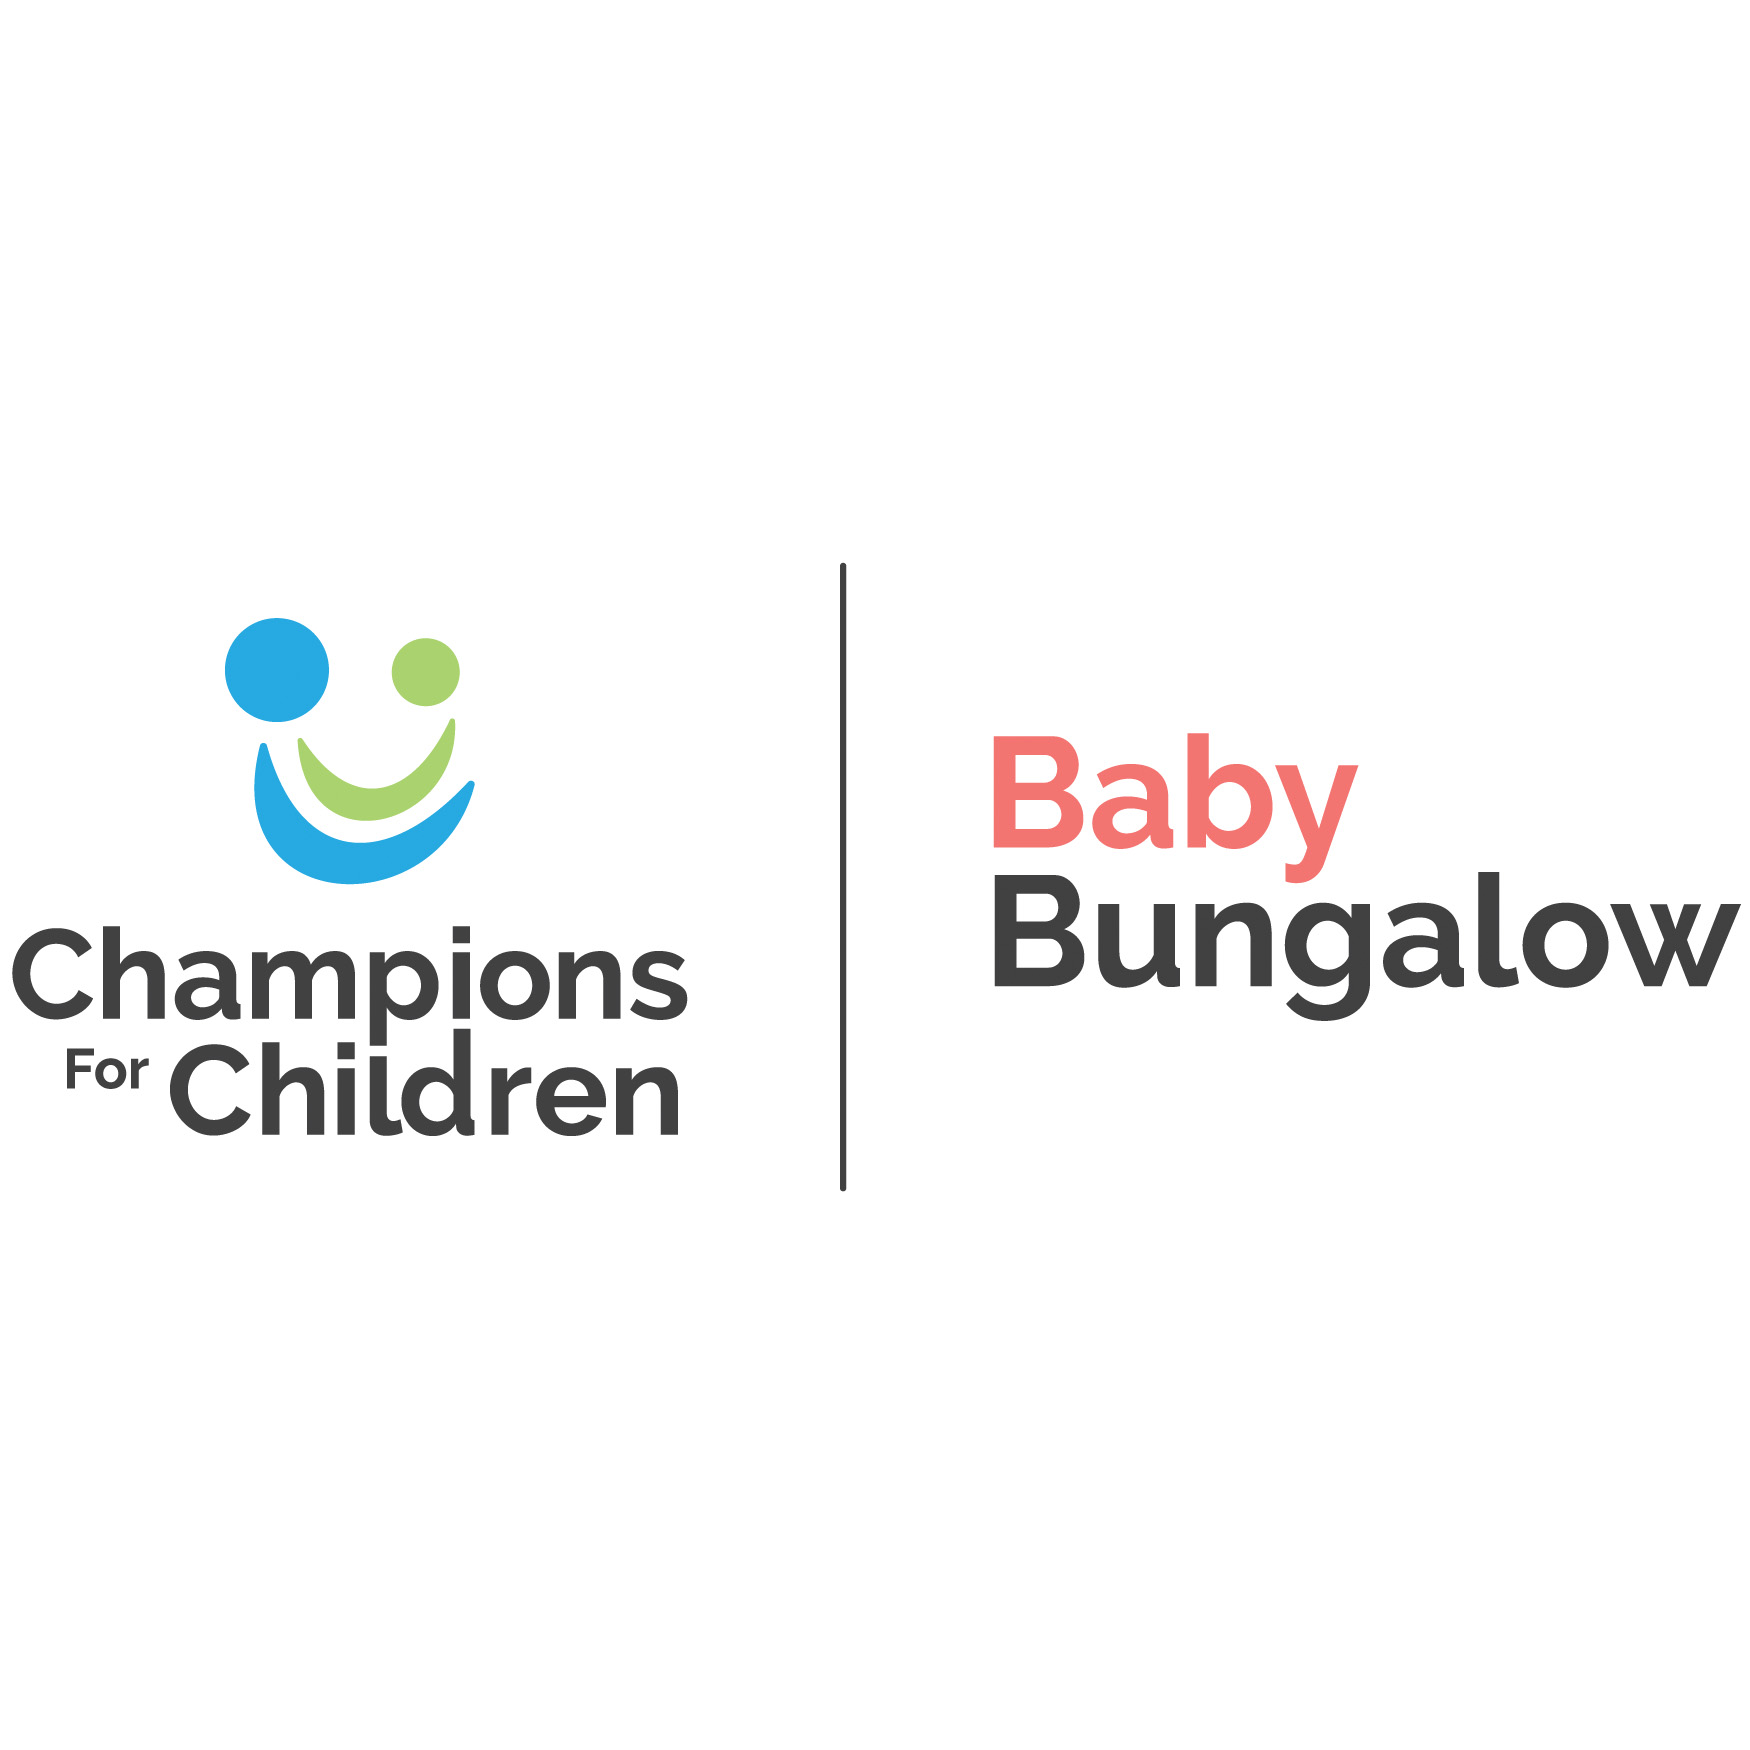 Champions for Children Baby Bungalow logo